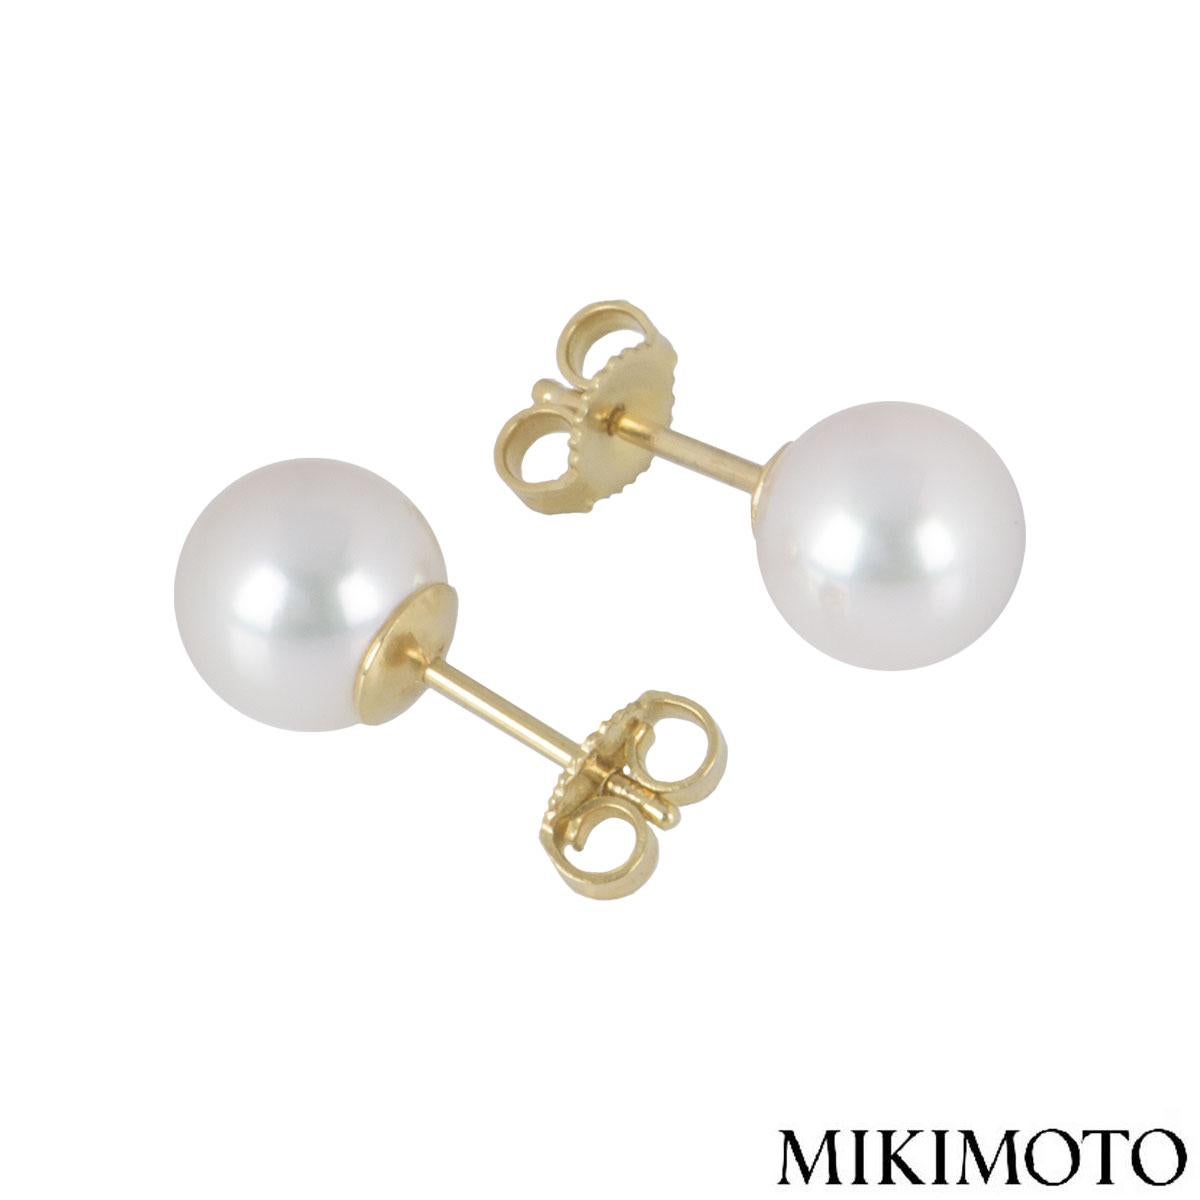 Women's Mikimoto Diamond and Pearl Earrings and Necklace